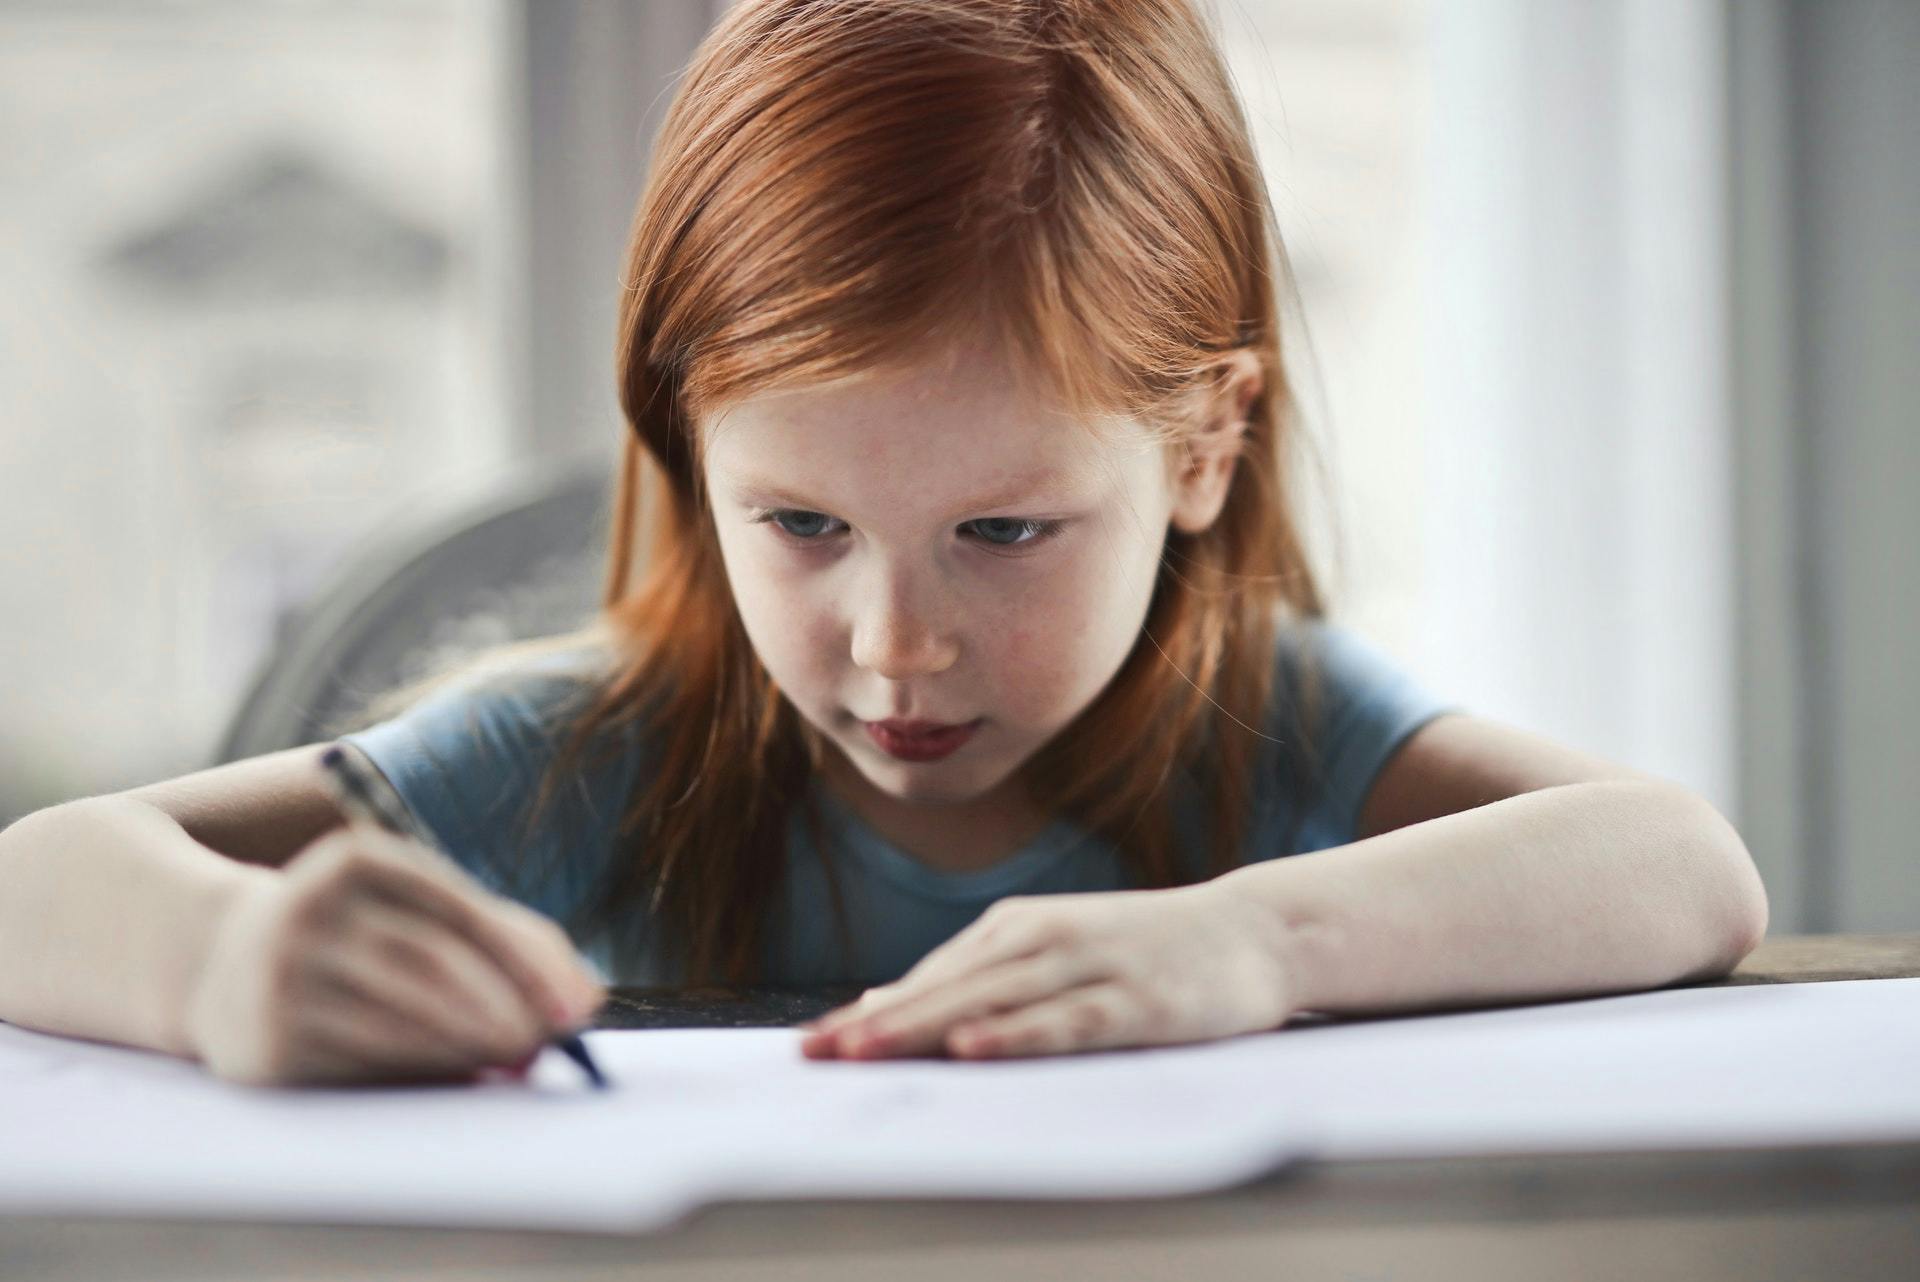 A young girl focuses on a vocabulary strategies worksheet.